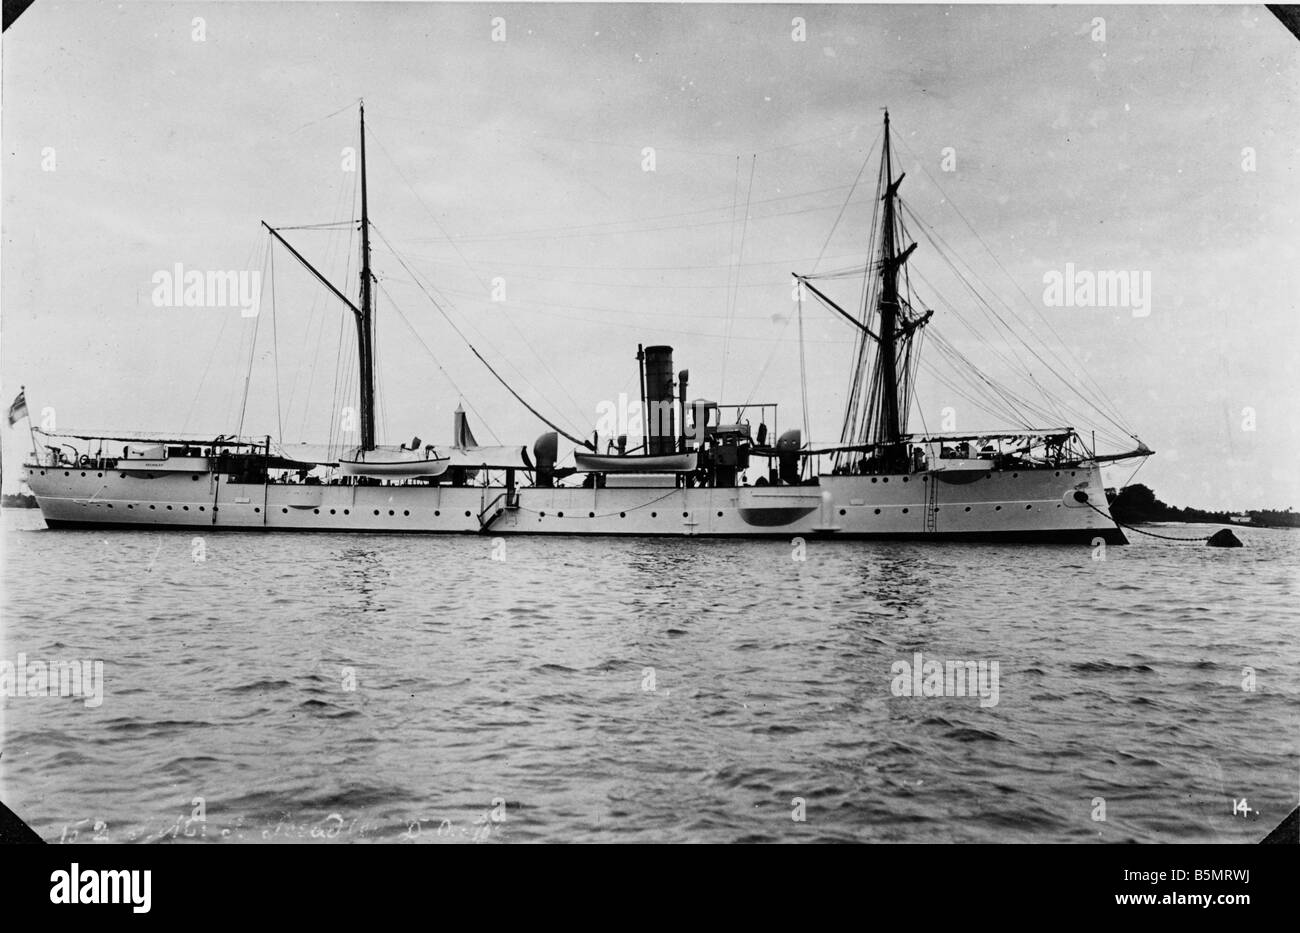 9AF 1914 0 0 A8 2 S M S Seeadler Daressalam Photo German East Africa now Tanzania as a German colony 1884 1920 S M S Seeadler in Stock Photo